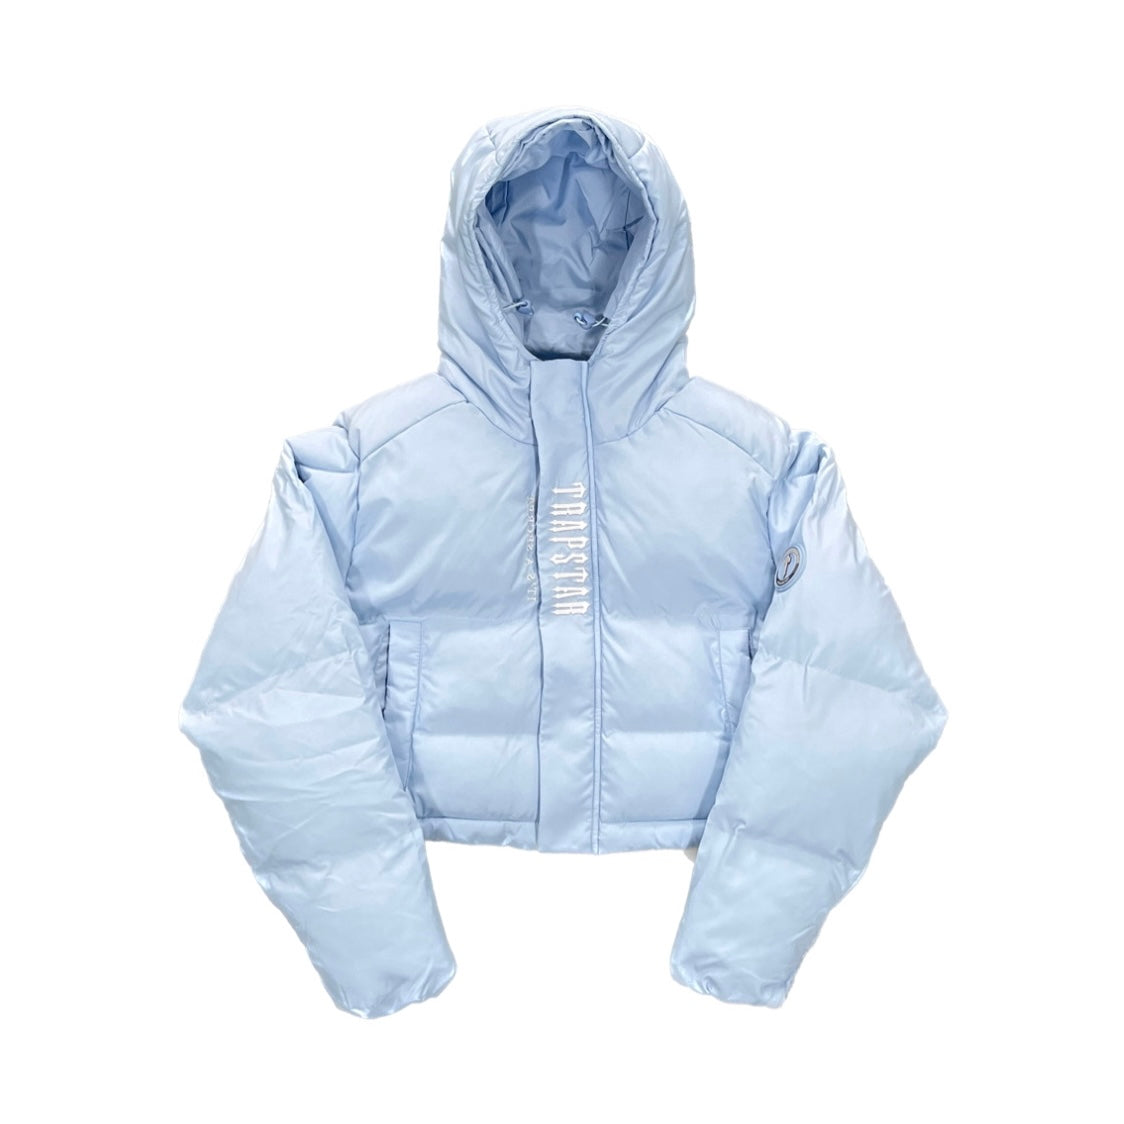 TRAPSTAR WOMAN HOODED PUFFER 2.0 JACKET -ICE BLUE